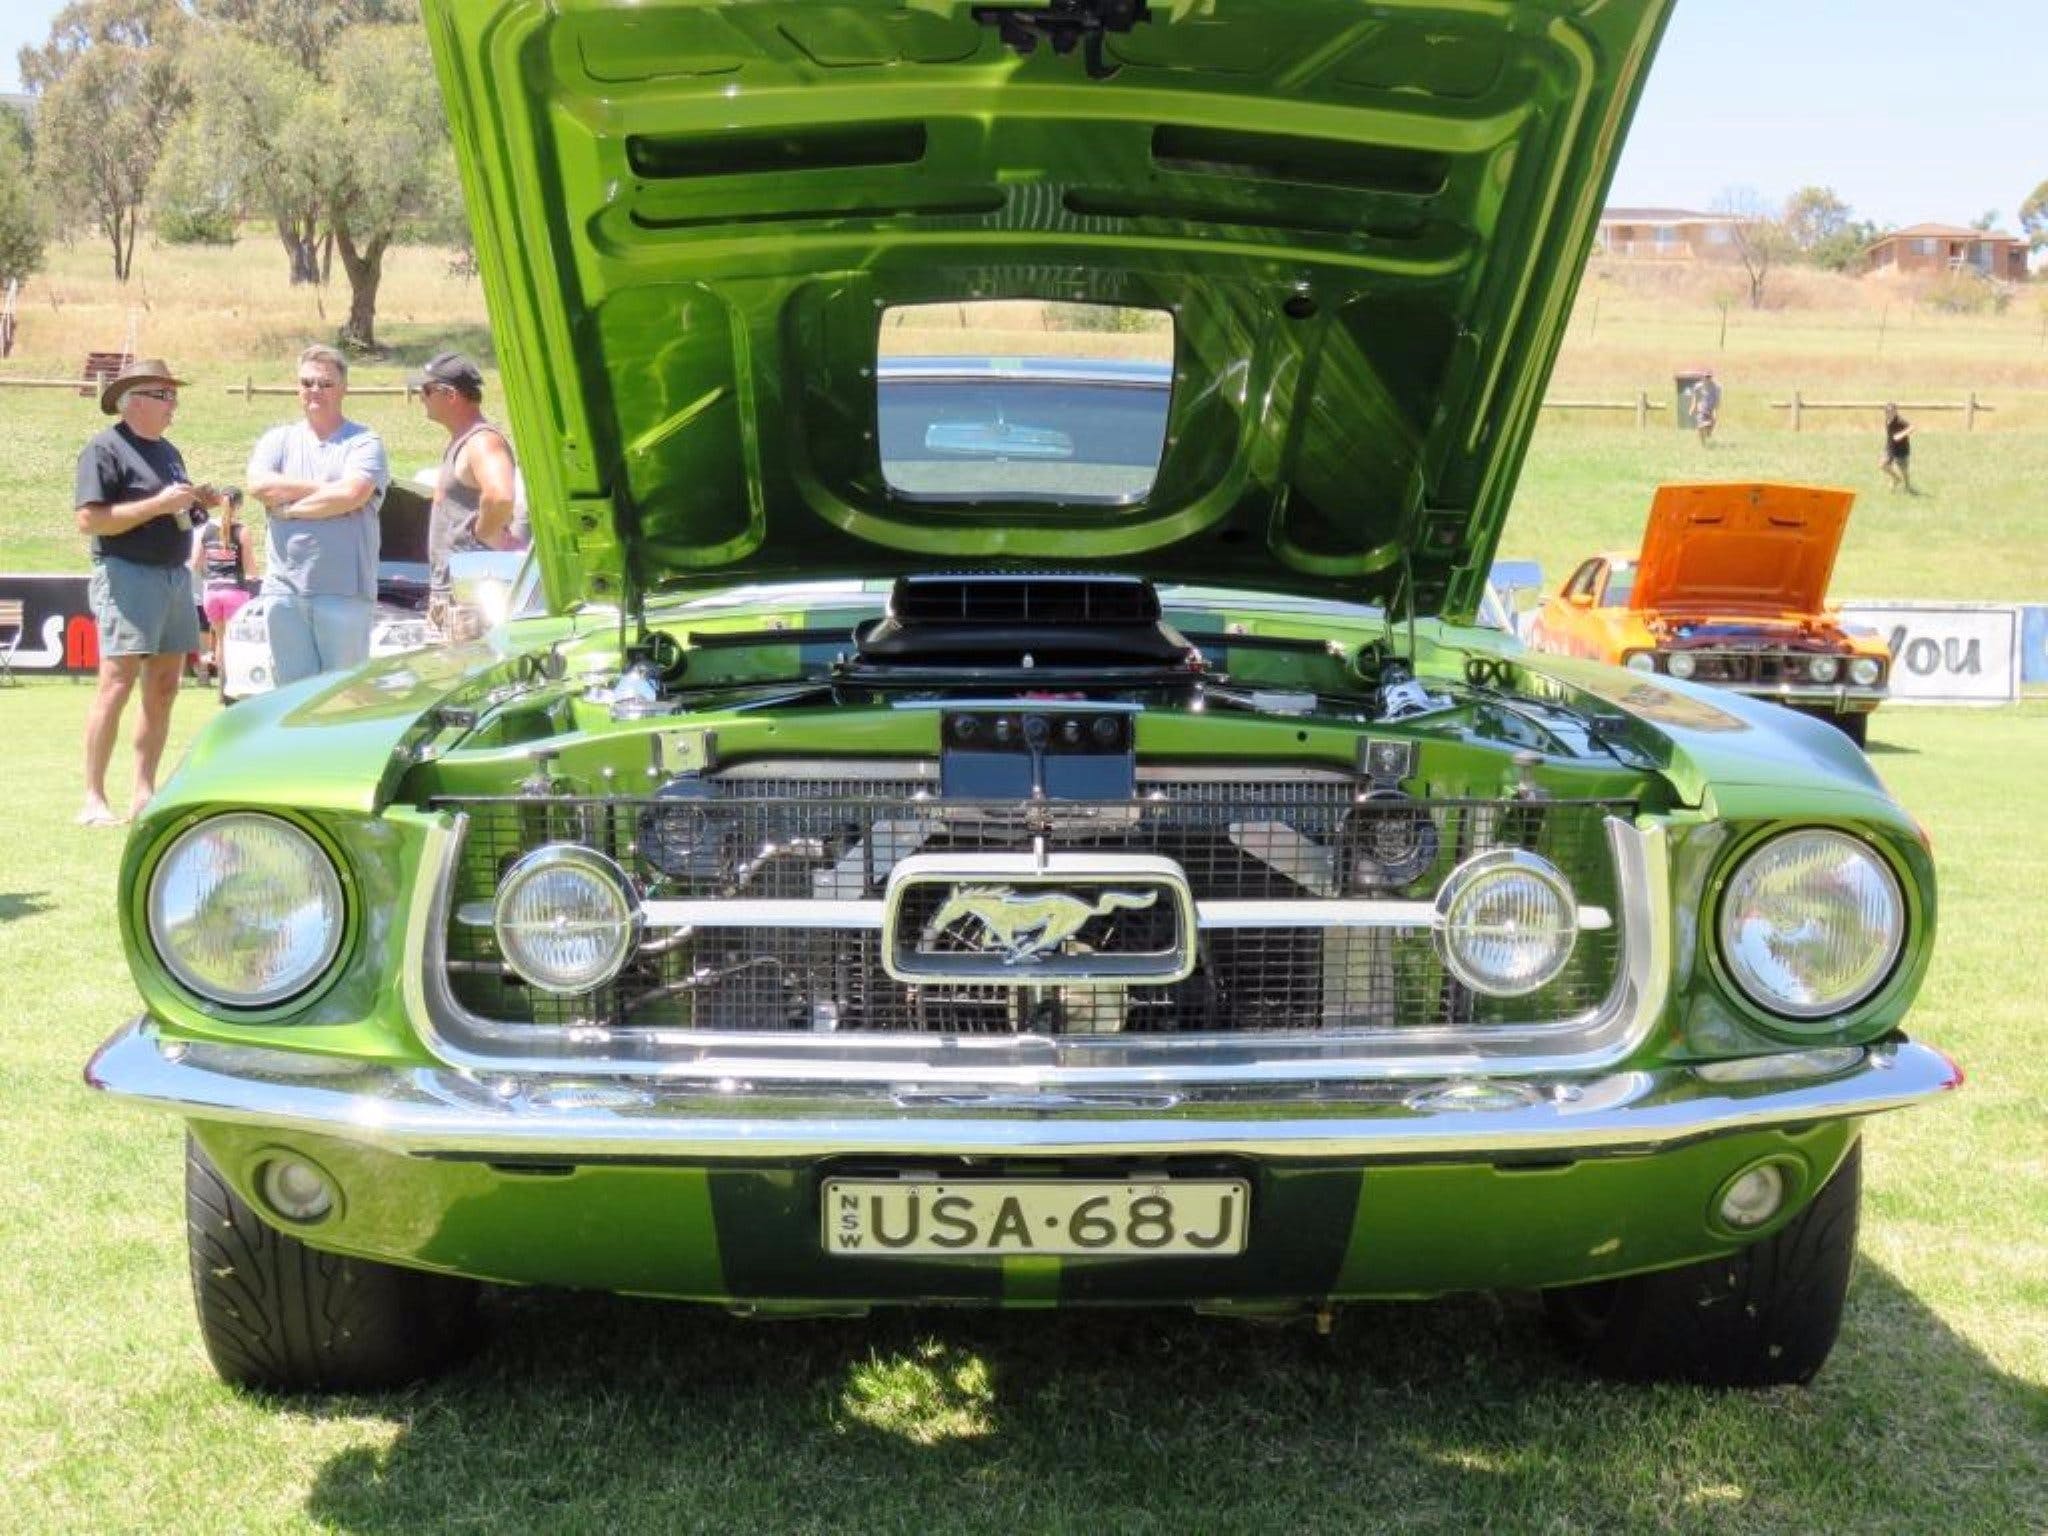 Central West Car Club Charity Show and Shine - St Kilda Accommodation